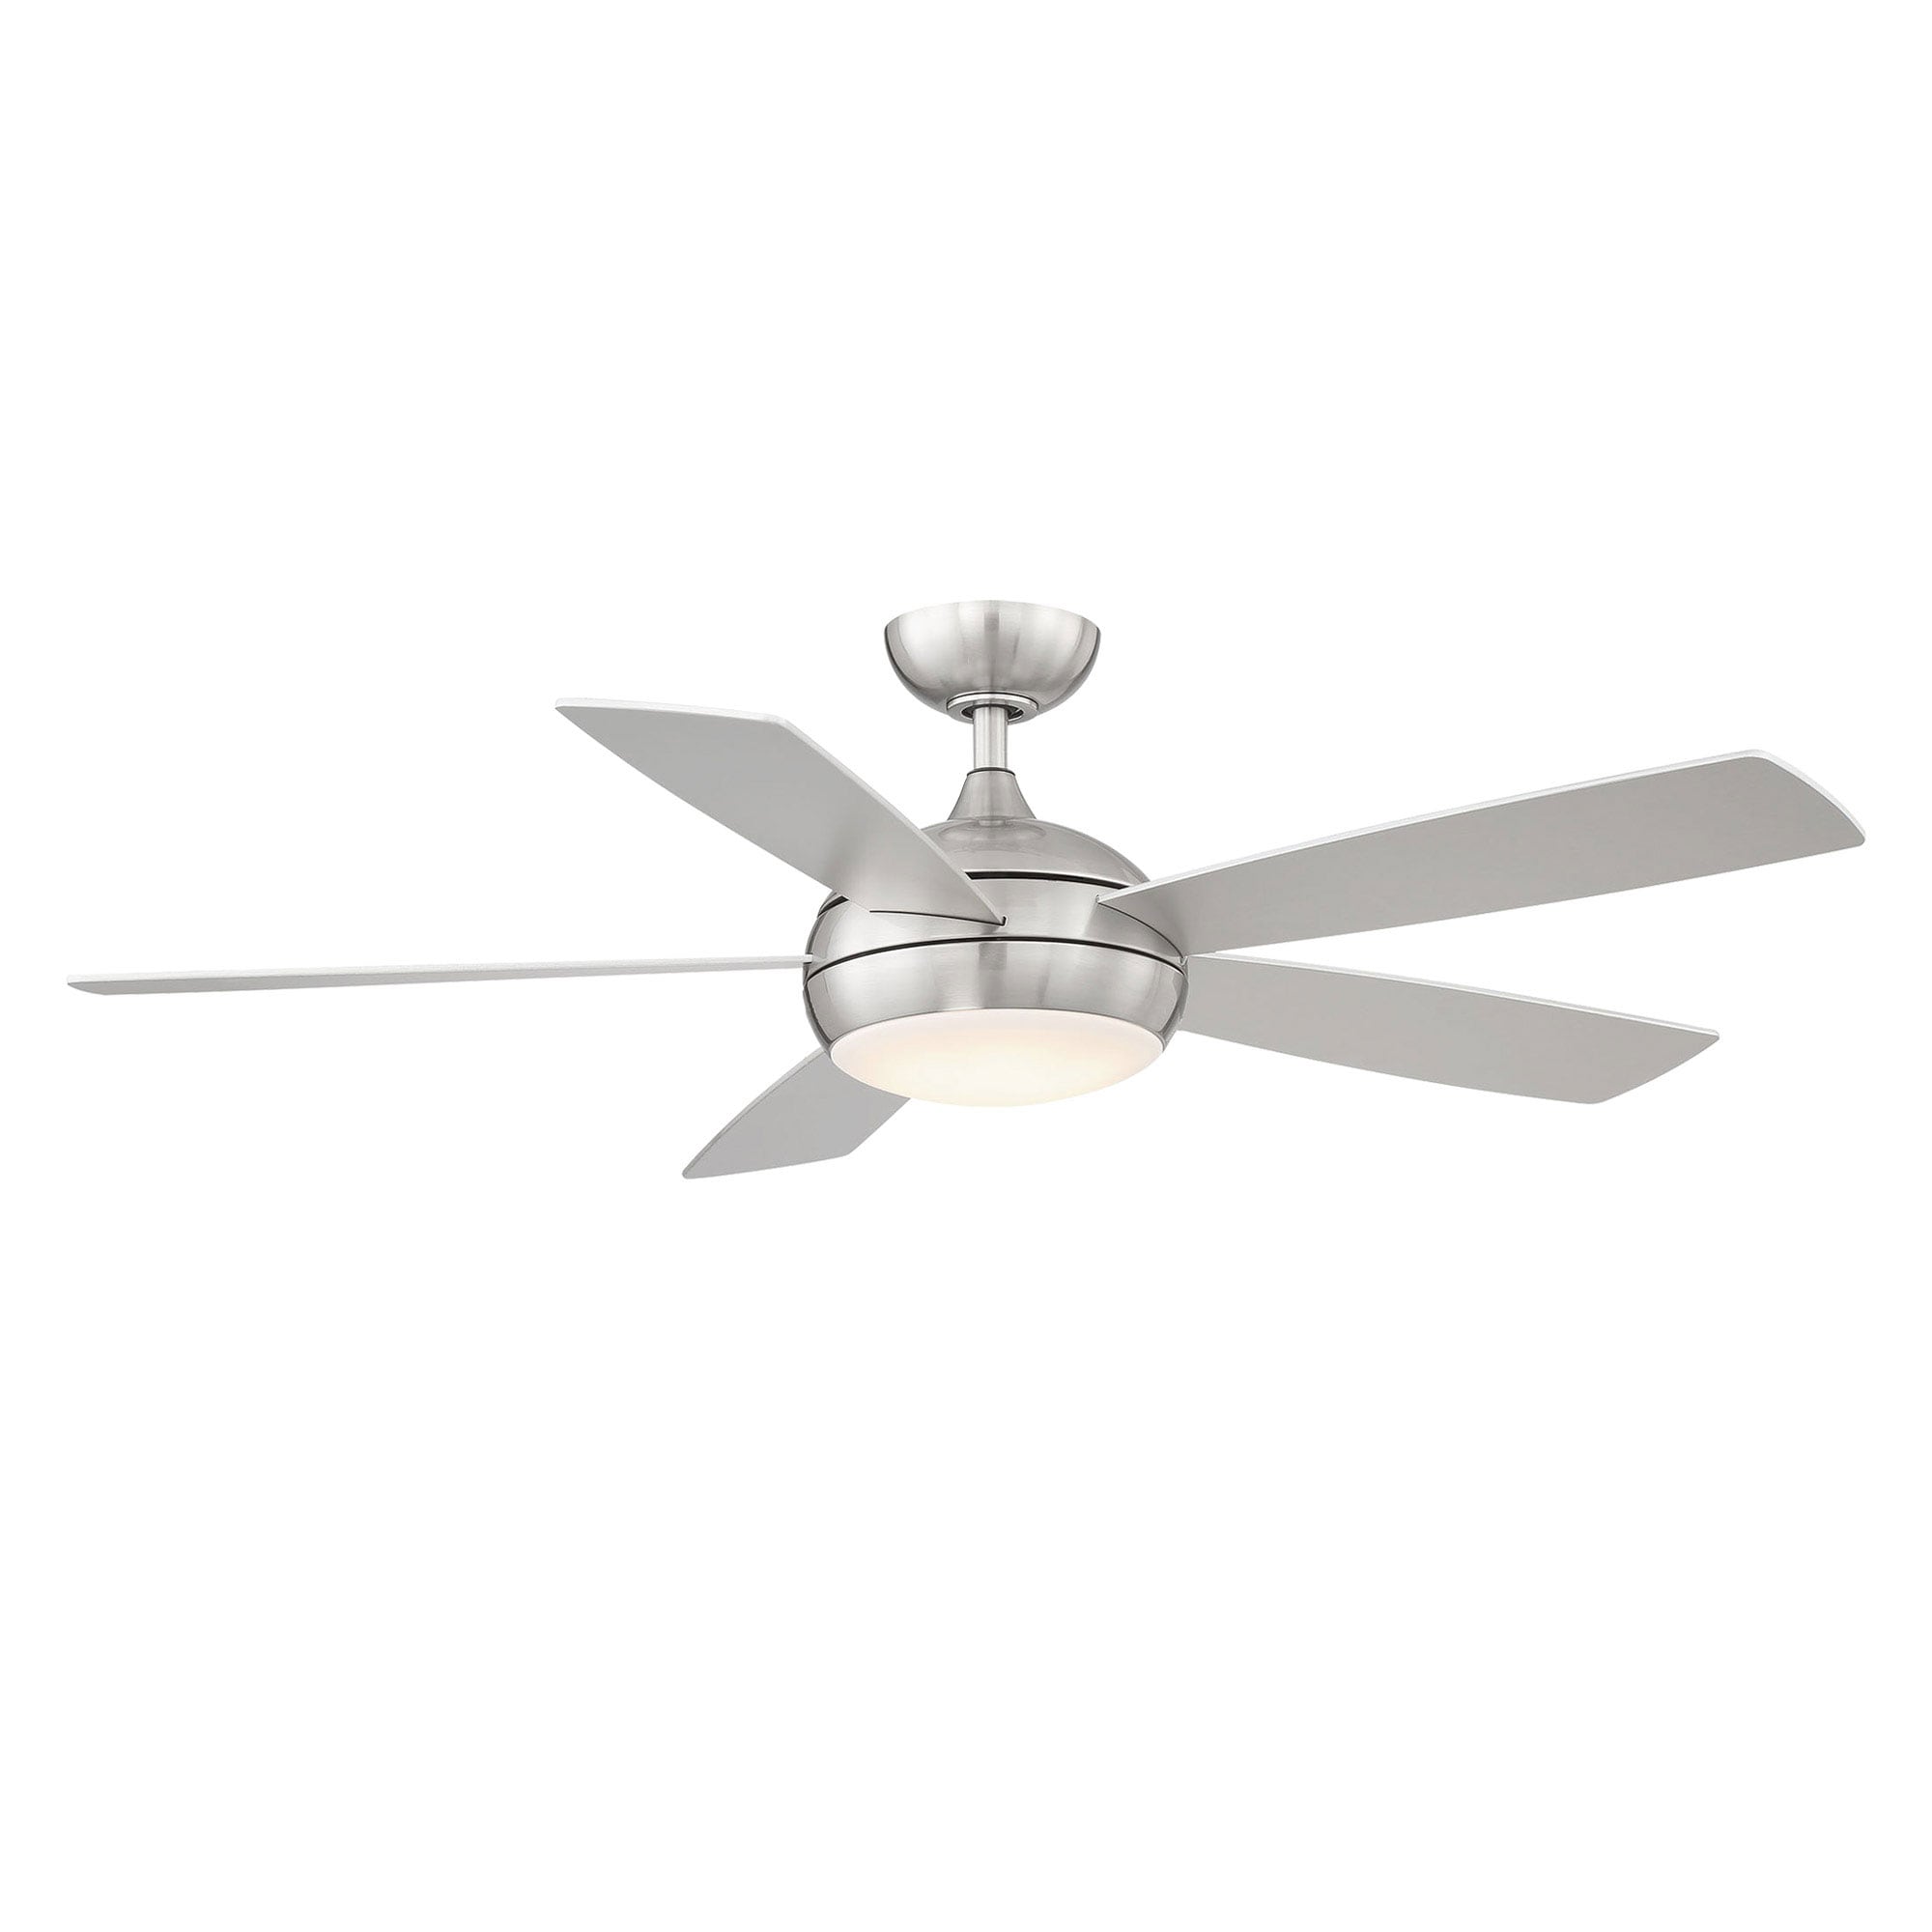 5 Blade Brushed Nickel Ceiling Fan With Wireless Remote Control 52 in 